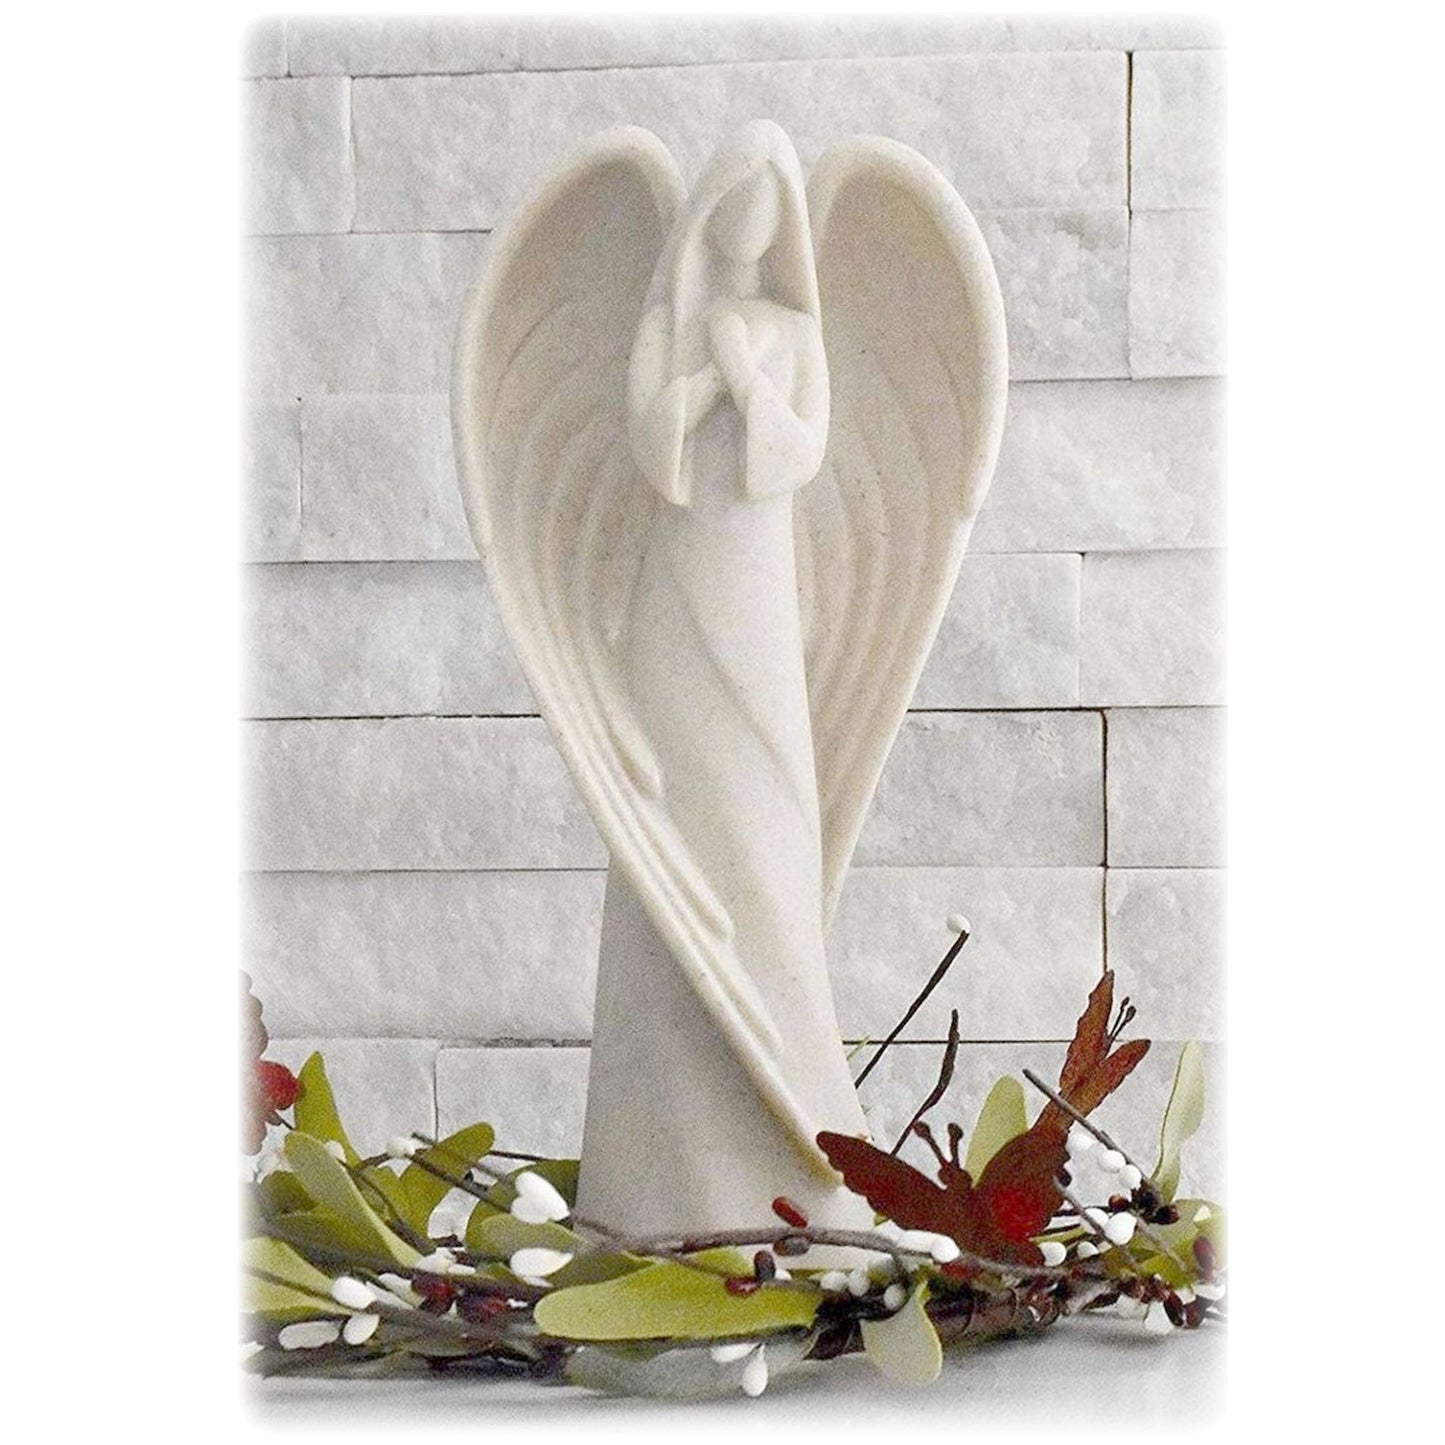 Mother's Birthday Gift Idea, Angel Statue with "Angel Mother" Refrigerator Magnet